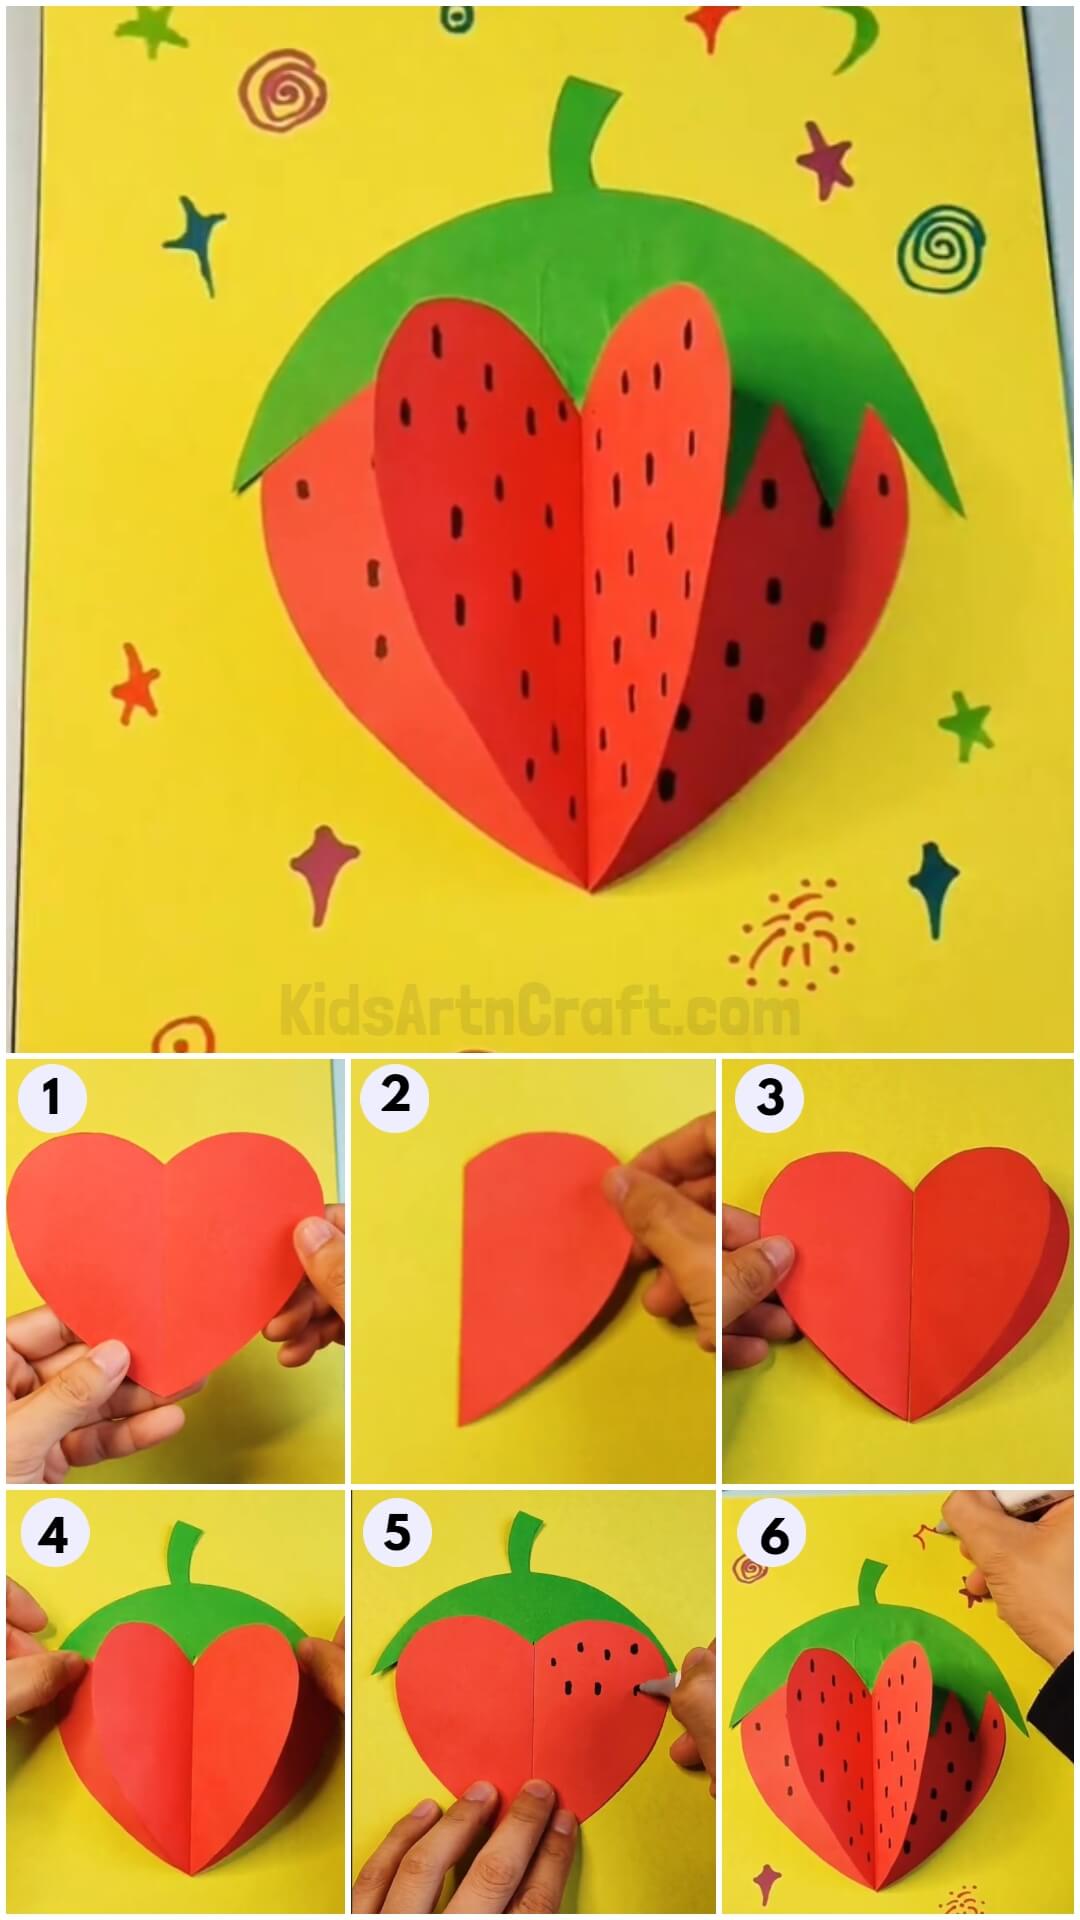 DIY Strawberry Craft Step-by-step Tutorial For Beginners-Step-by-step Instructions For Making A Strawberry Craft For Beginners